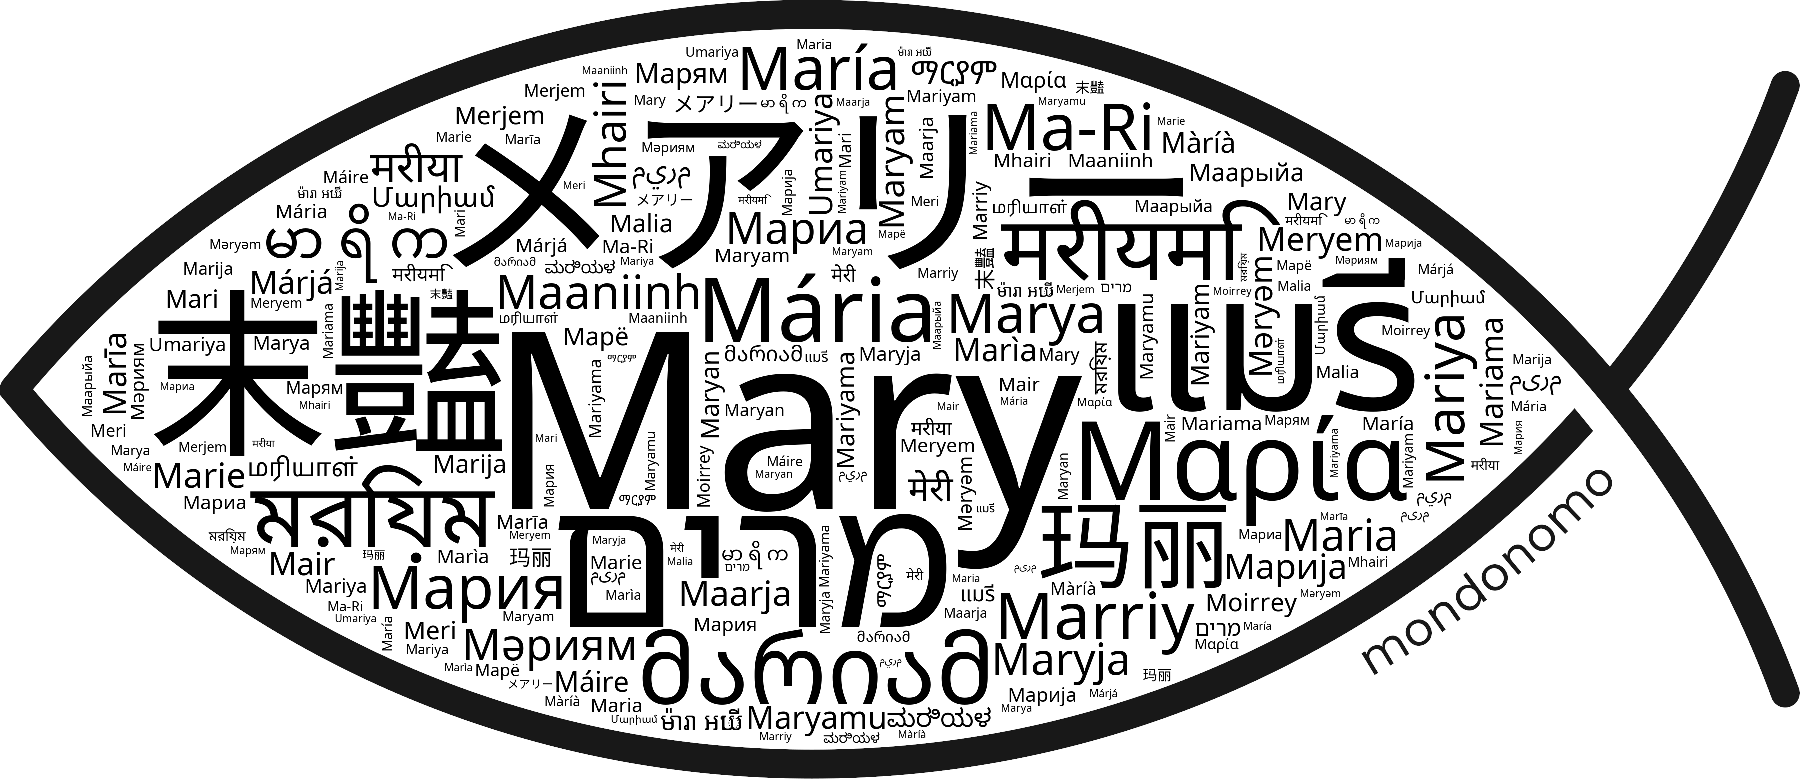 Name Mary in the world's Bibles